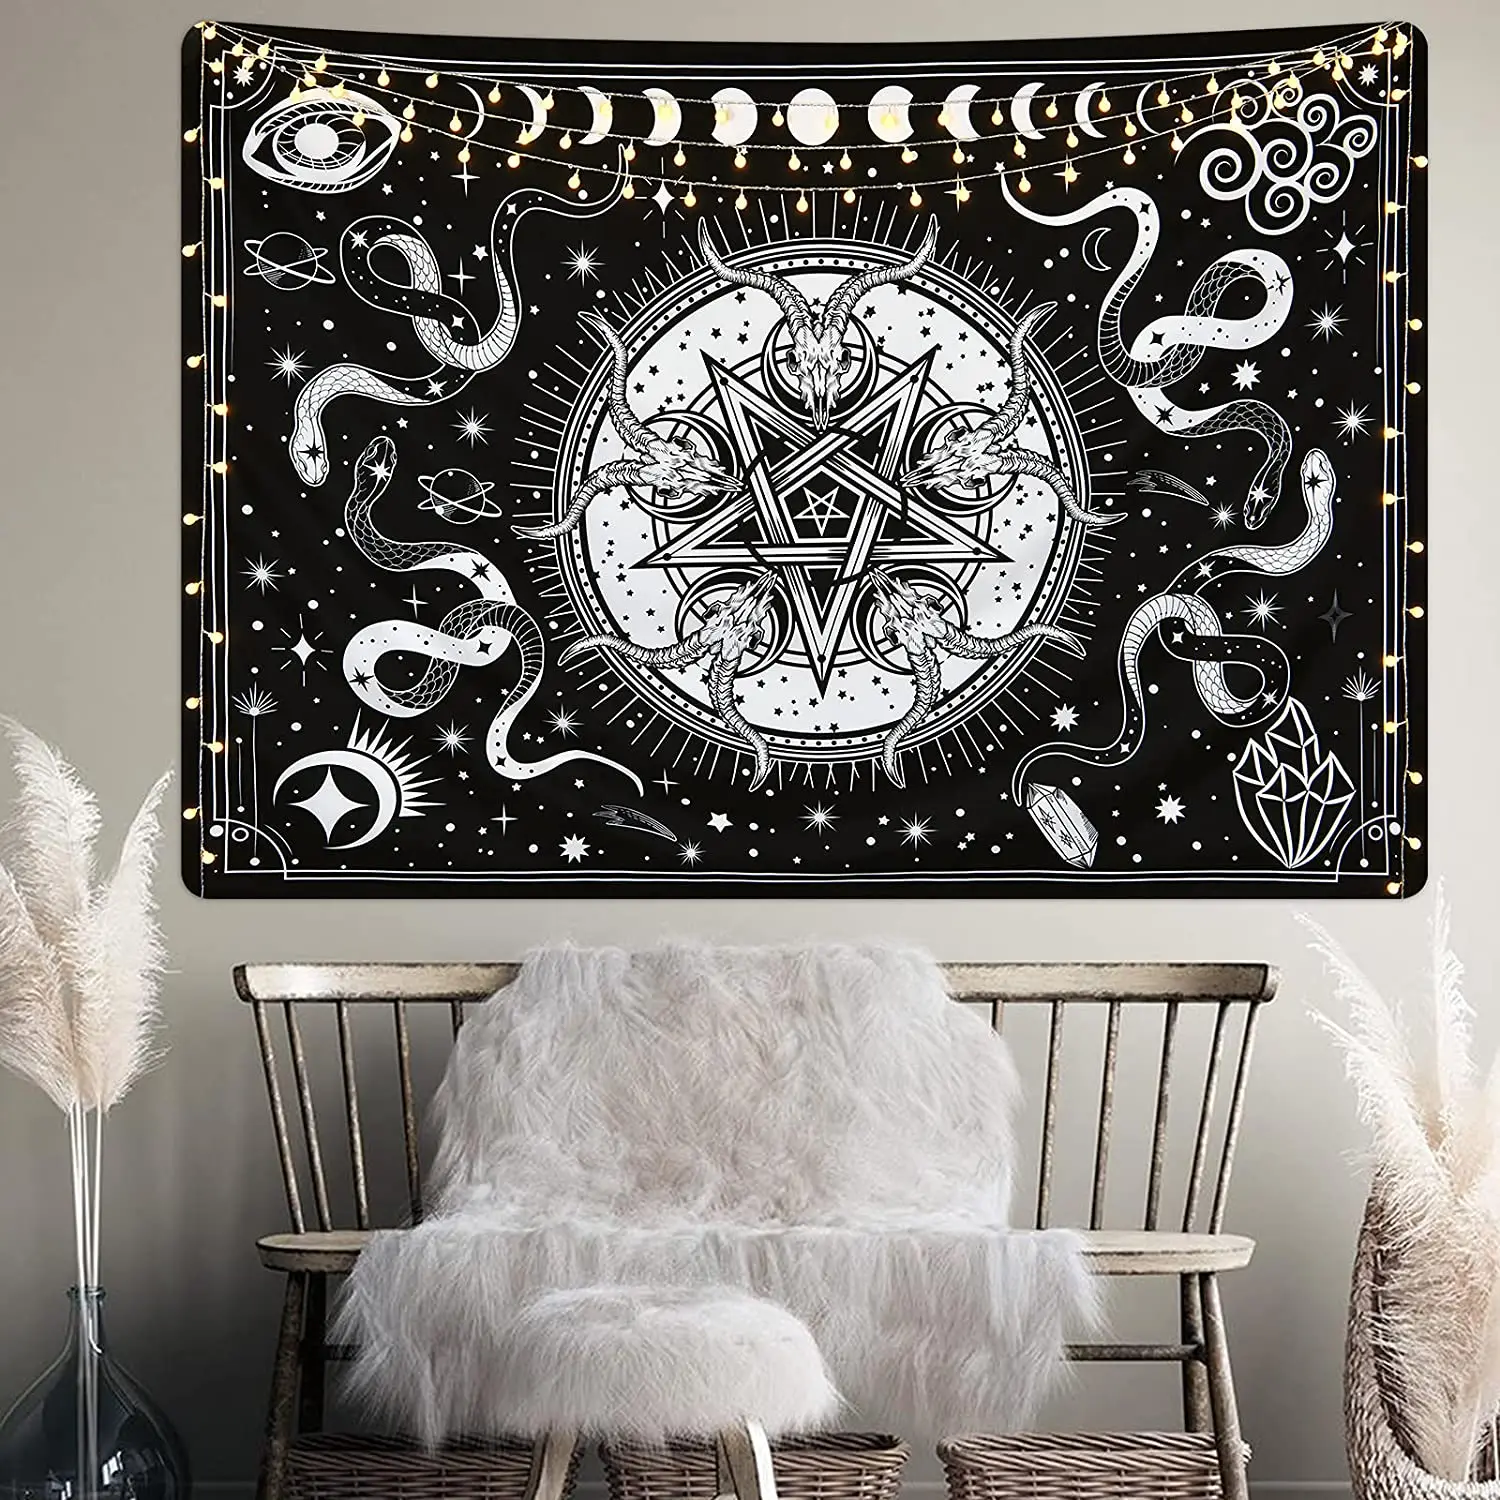 Witch Tapestry Black and White Tapestry Snake Tapestries Moon Star Tapestry Black Gothic Tapestry Wall Hanging for Room